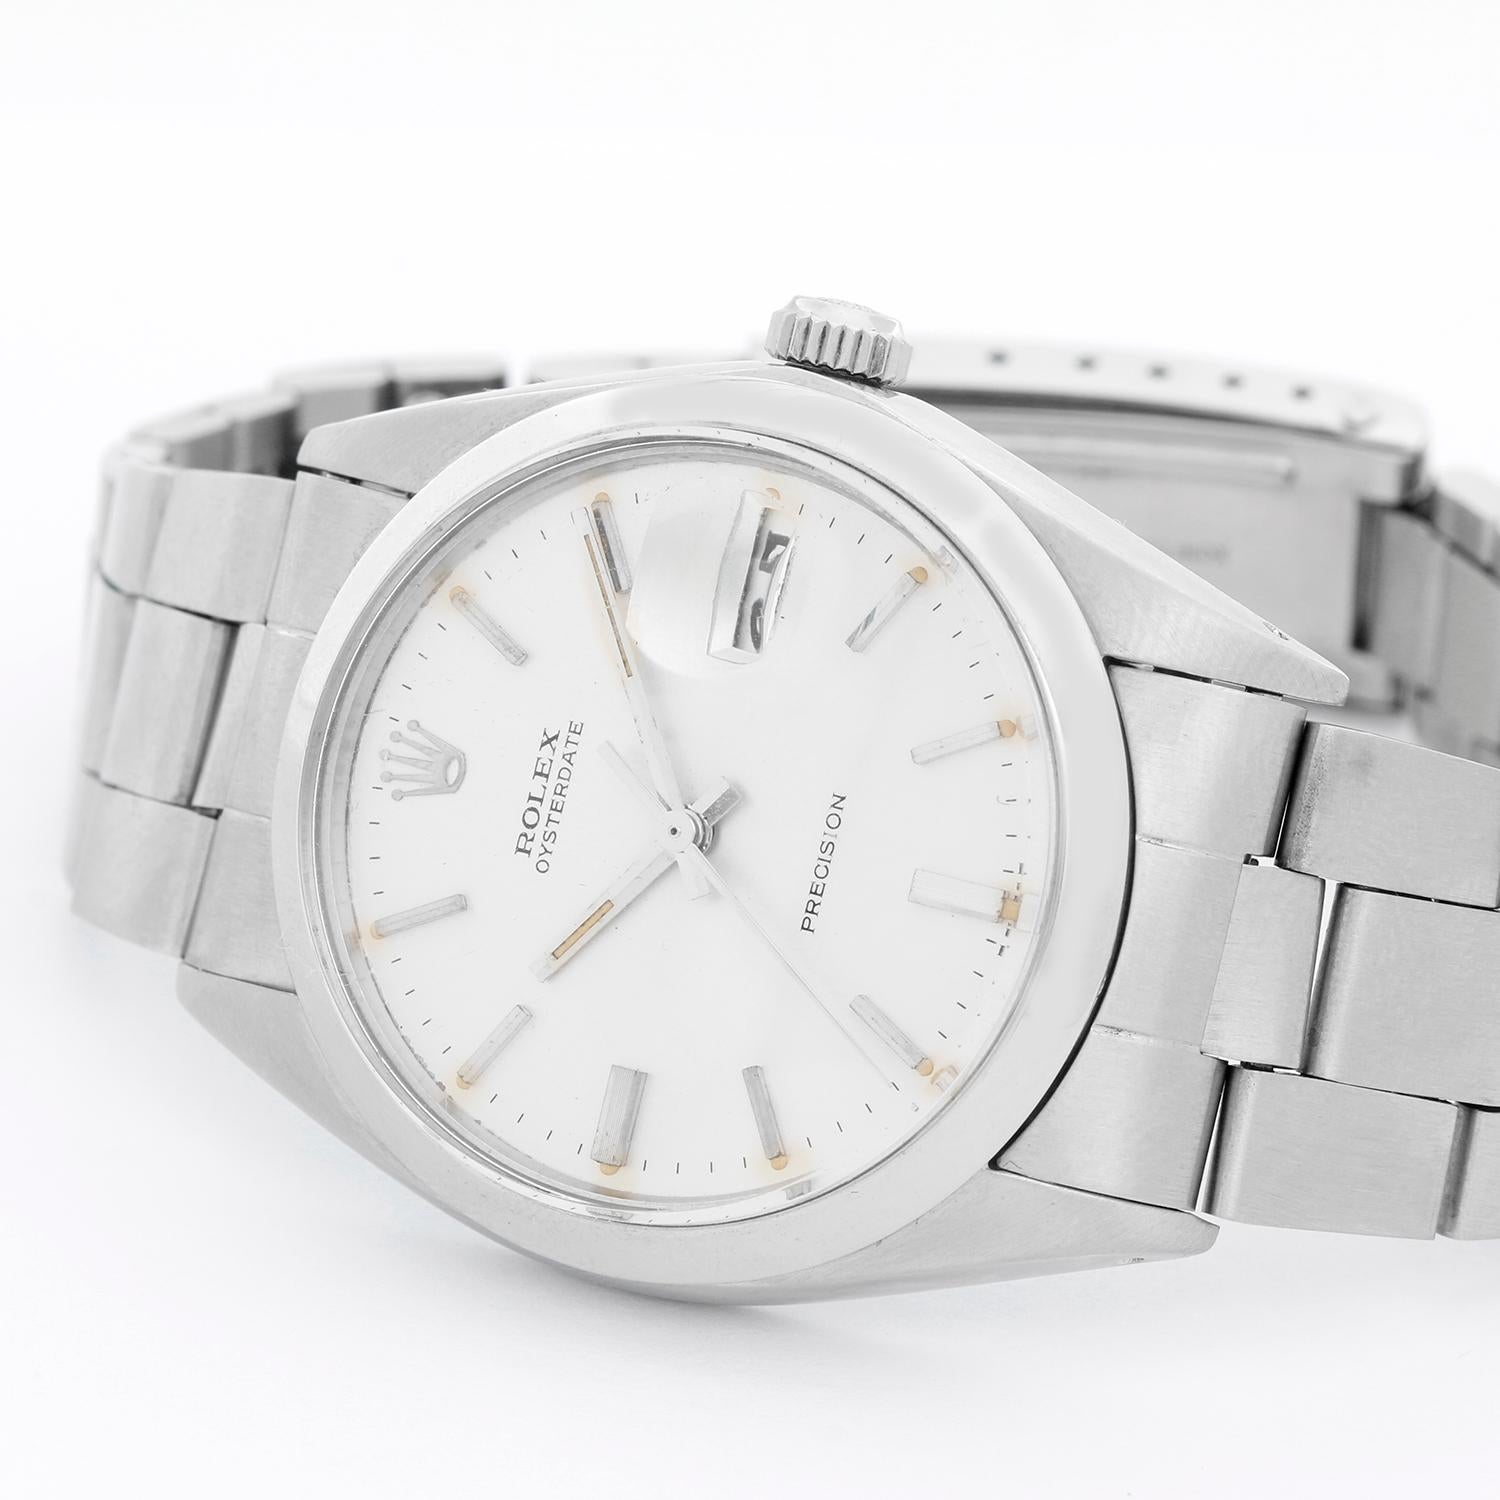 Men's Rolex Oysterdate Silver Dial Watch 6694 - Automatic winding. Stainless steel (34 mm ). Silver dial with stick hourmarkers. Oyster bracelet. Pre-owned with custom box